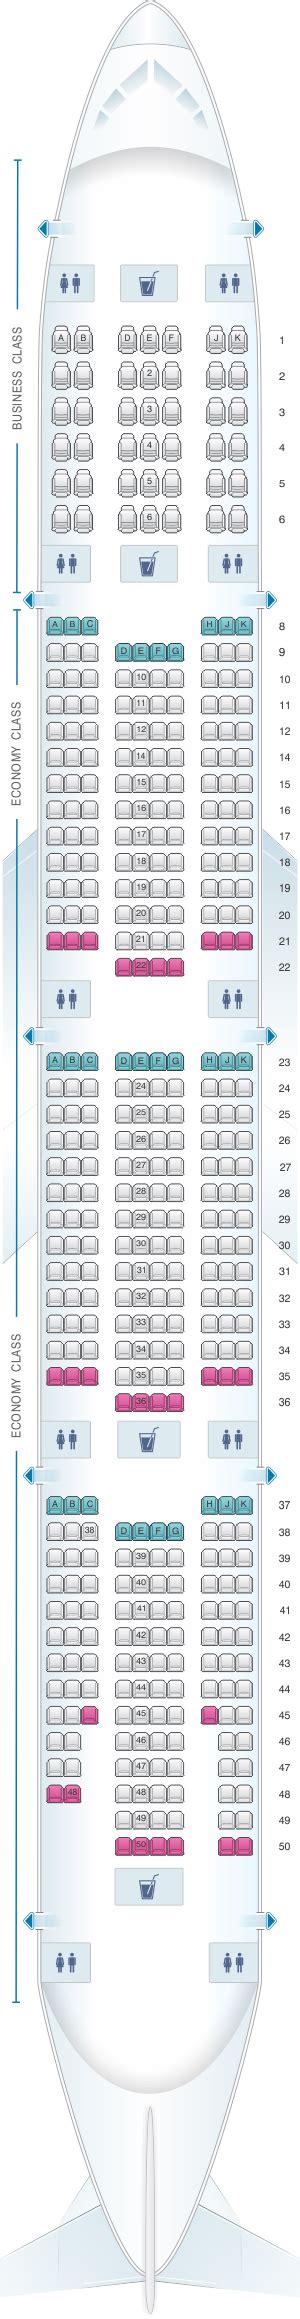 Seat Map Emirates Boeing B777 300er Two Class